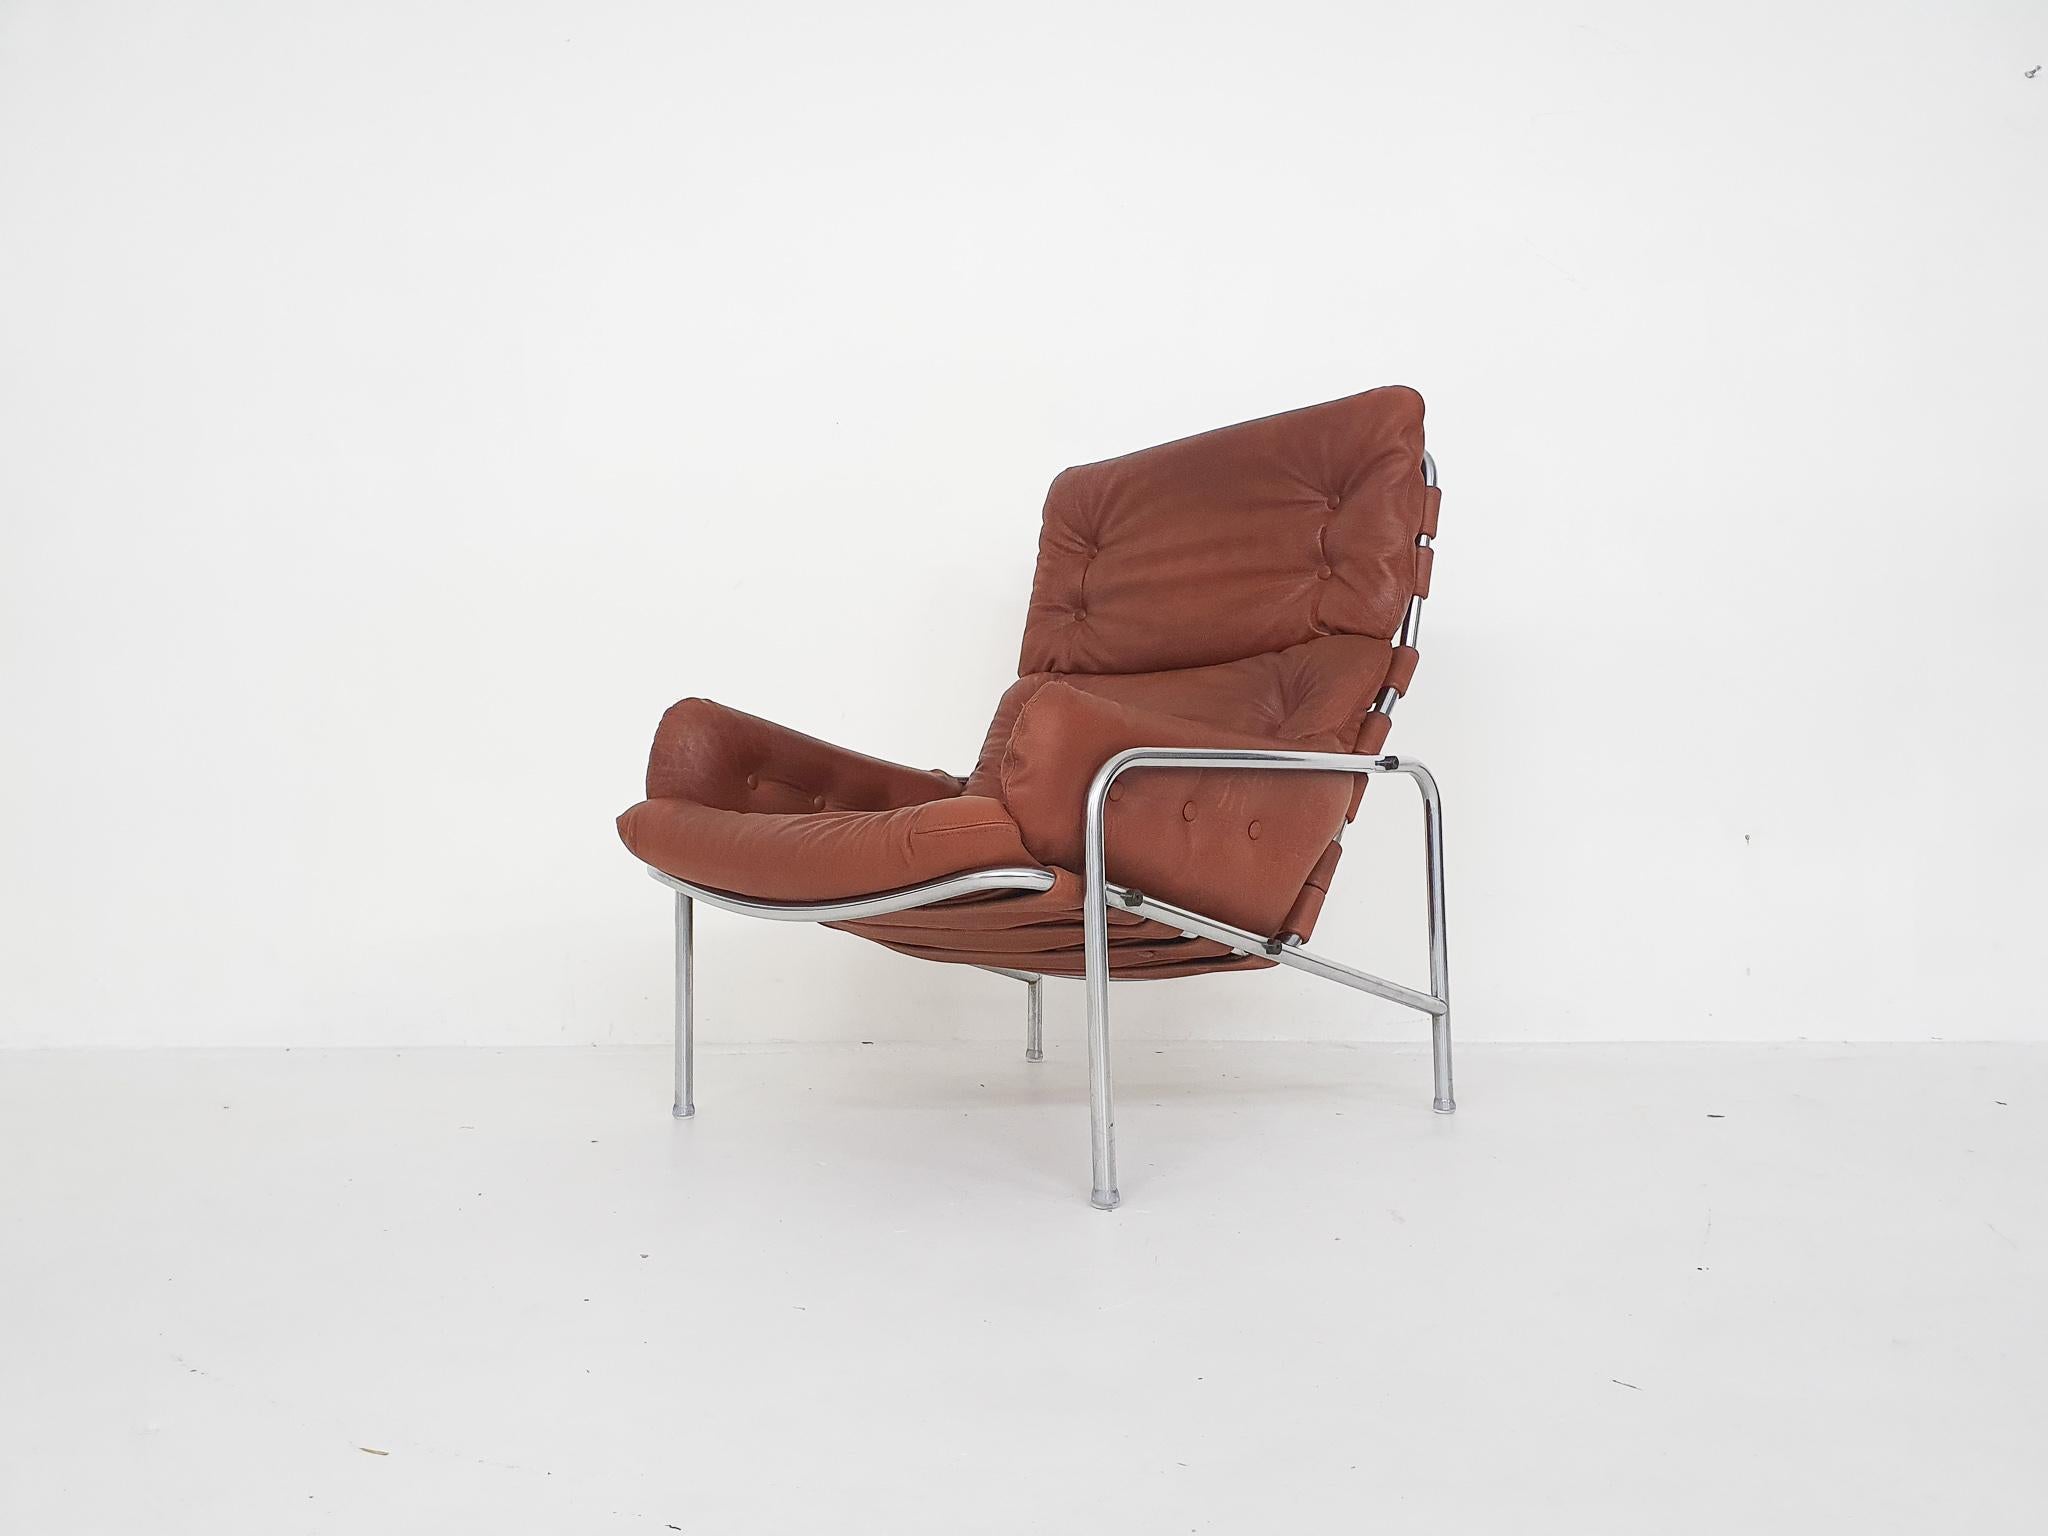 Cognac leather lounge chair by Martin Visser for ’t Spectrum model Sz09 “Nagoya”, made and designed in The Netherlands in 1969.

Visser designed this lounge chair in 1969 when he was working for Dutch furniture manufacturer ’t Spectrum. This is